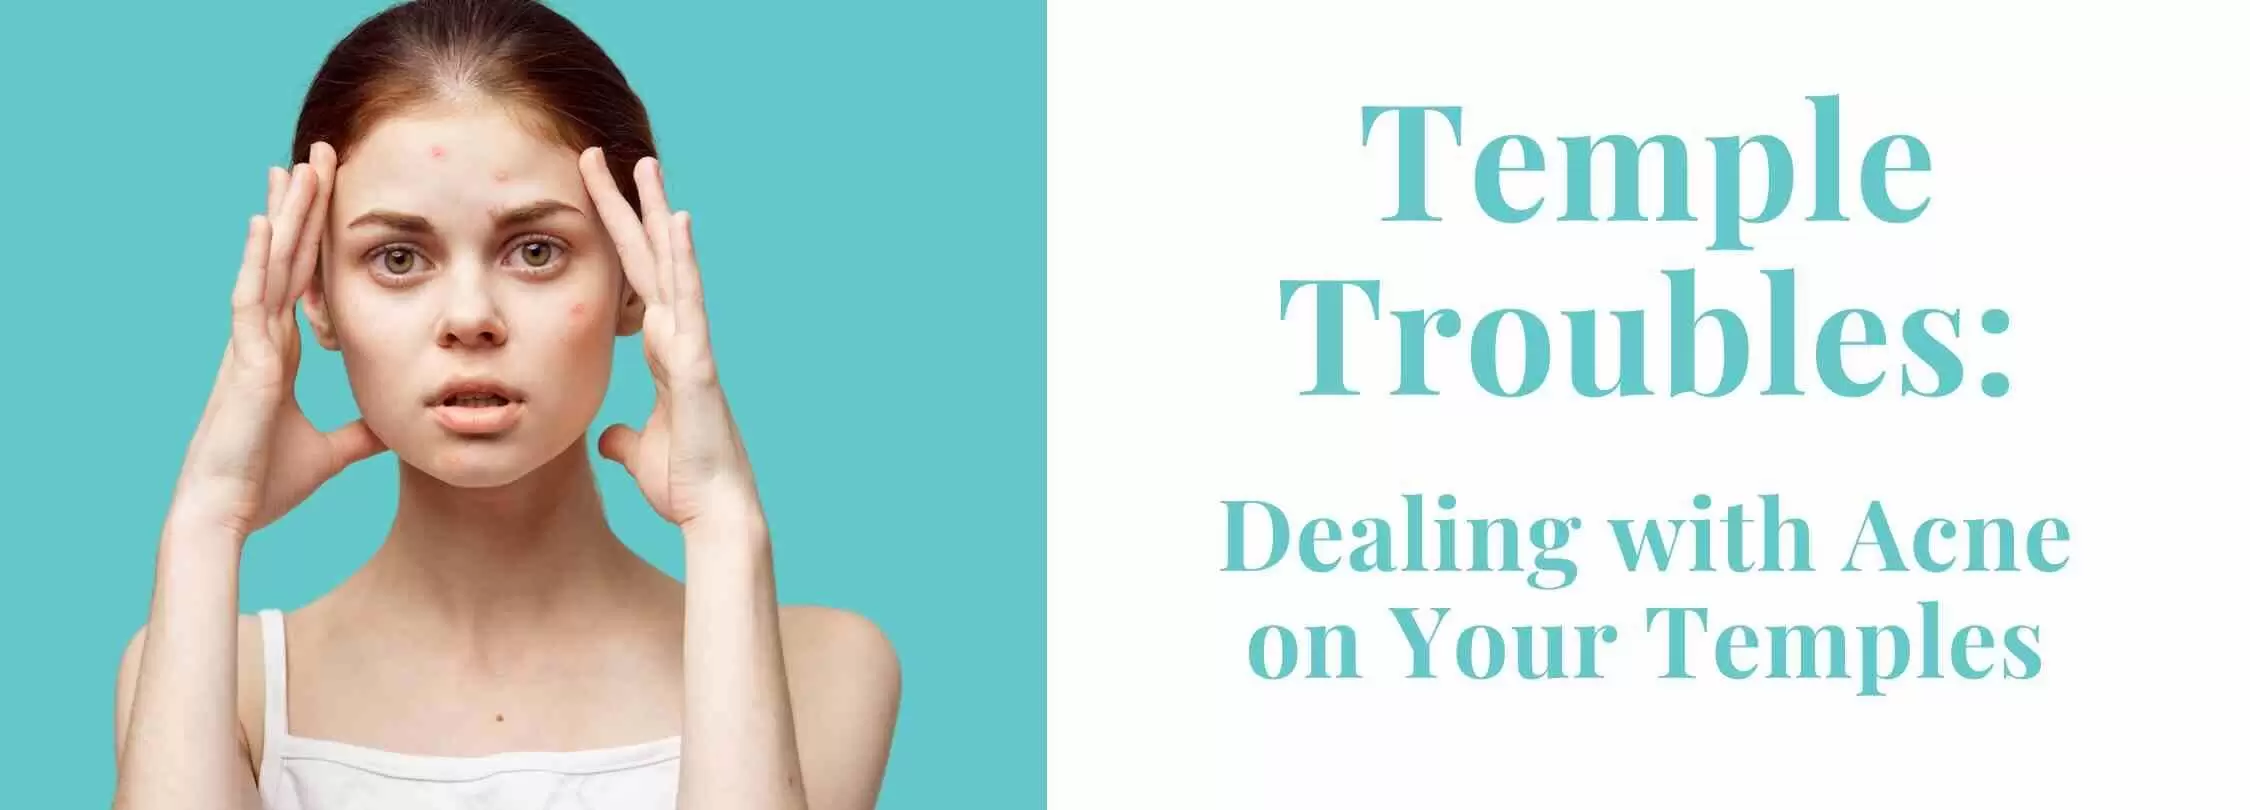 Temple Troubles: Dealing with Acne on Your Temples